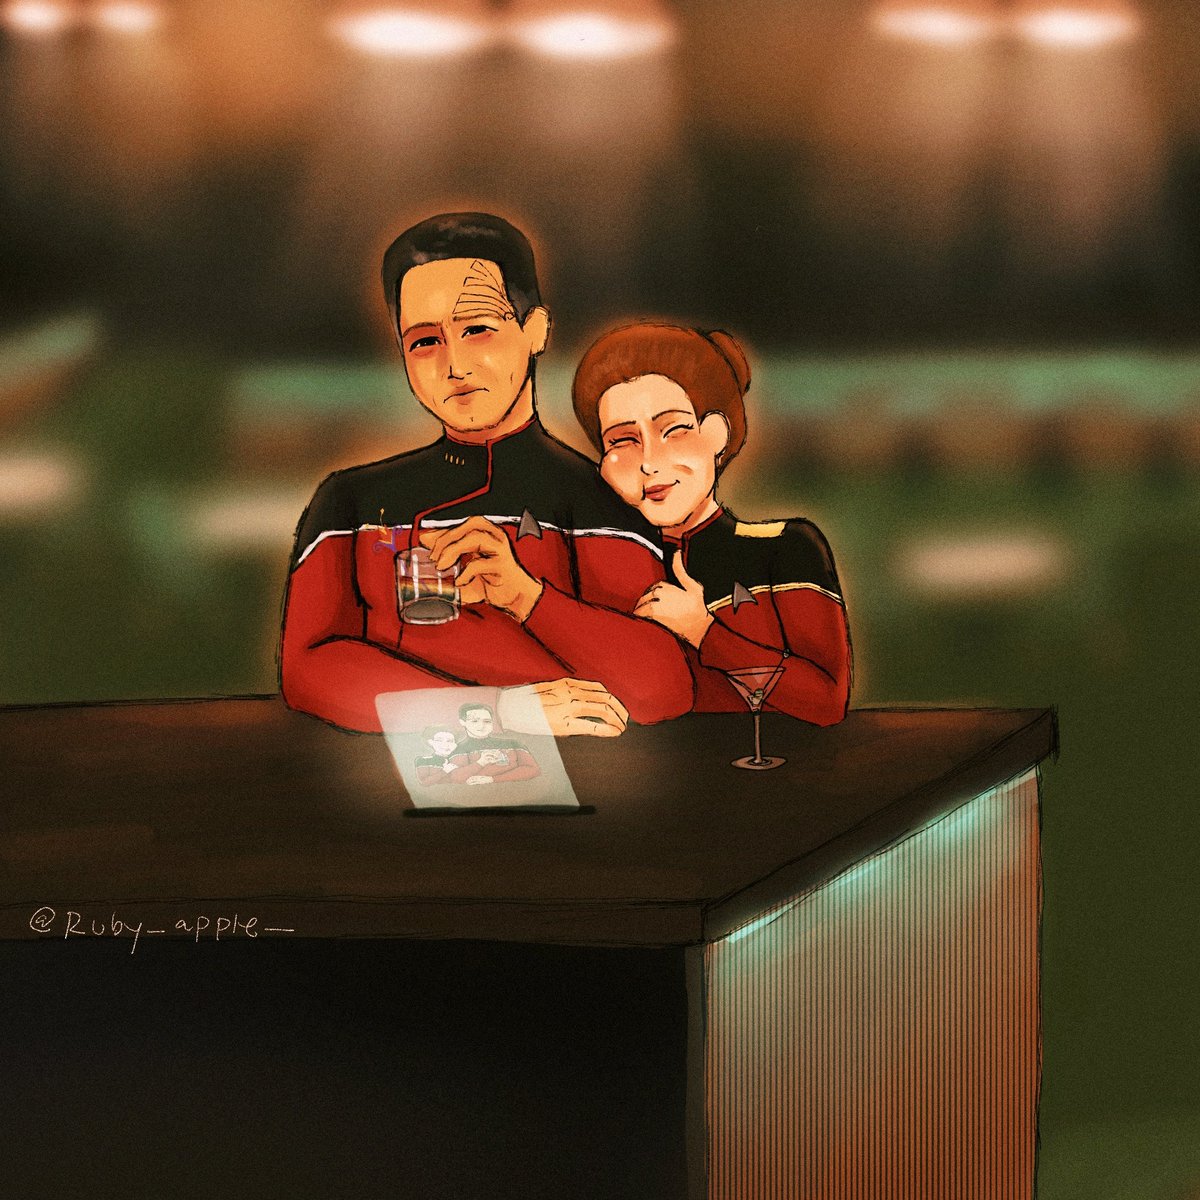 She wants to take a picture but he's too distracted by his nasty alien drink. 

Got bored on the plane and drew this, idk what it is lol. #startrekvoyager #janewaychakotay #MakeJChappen #captainjaneway #chakotay #katemulgrew #robertbeltran